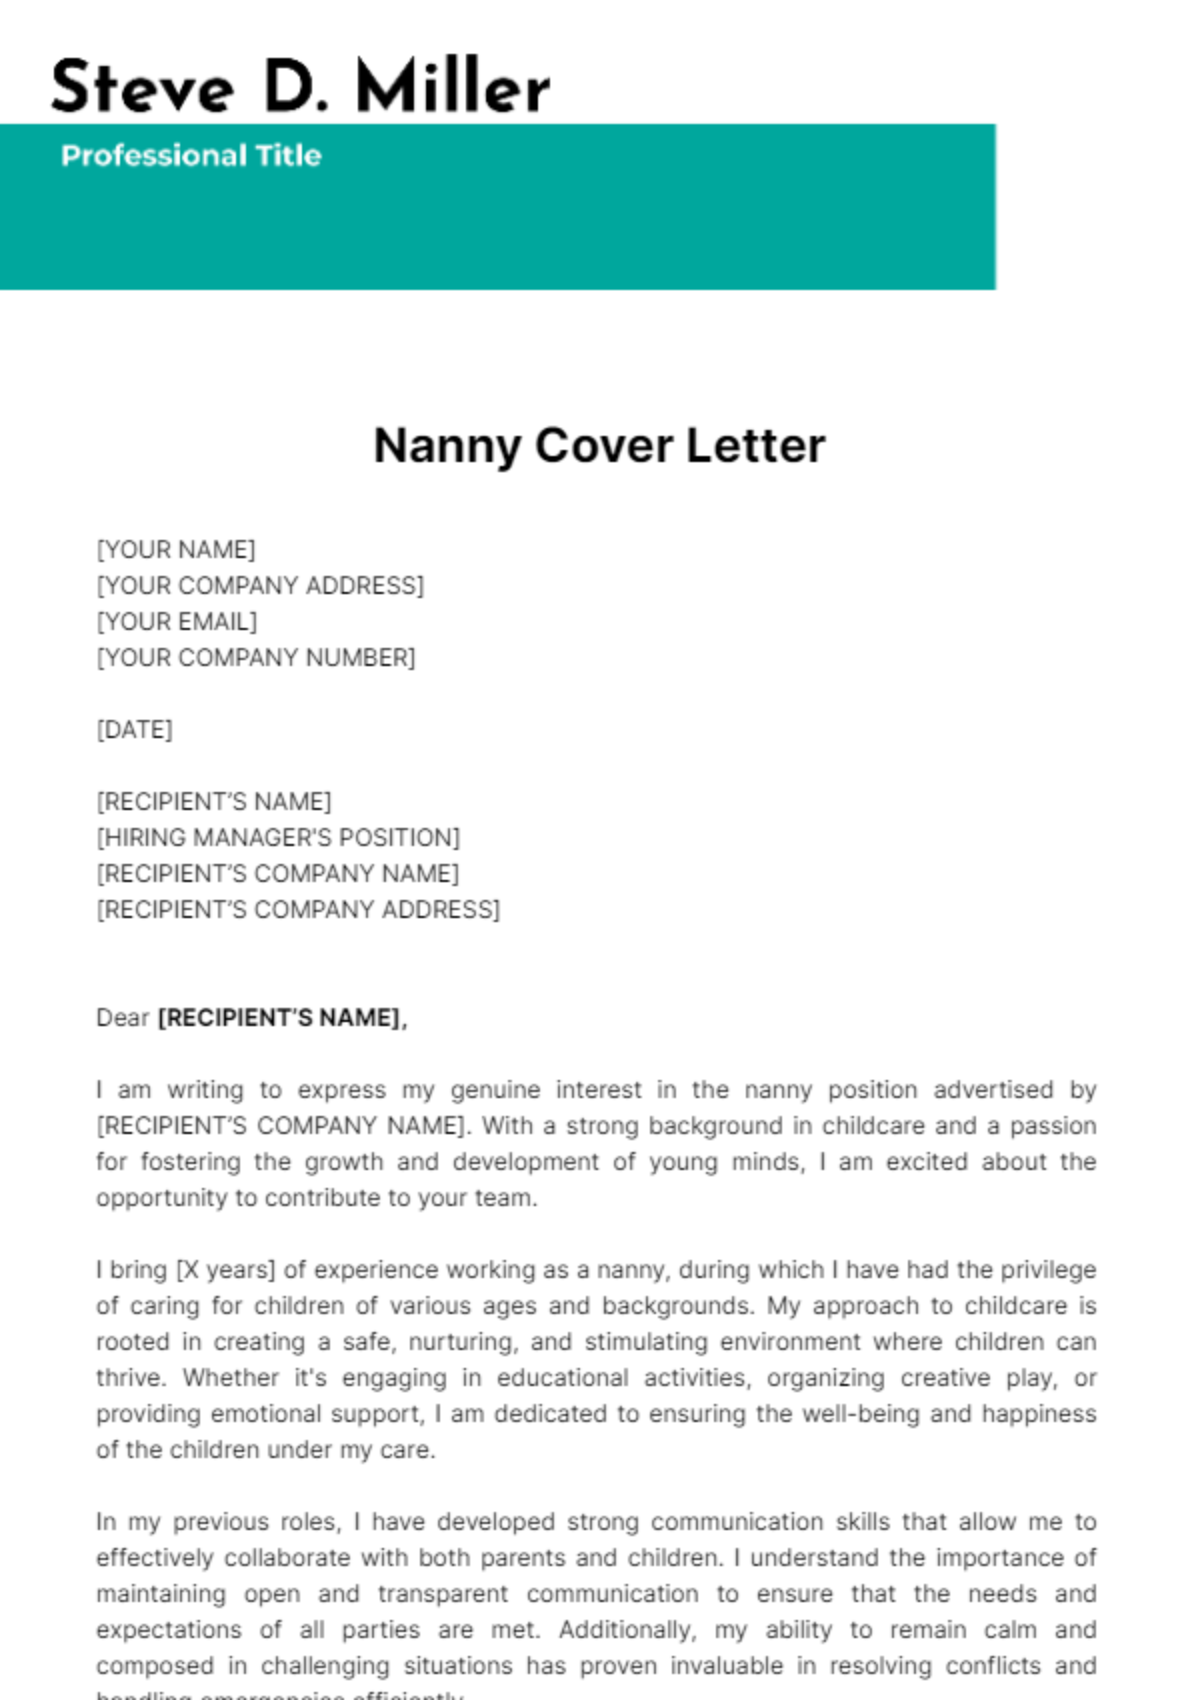 Nanny Cover Letter Template